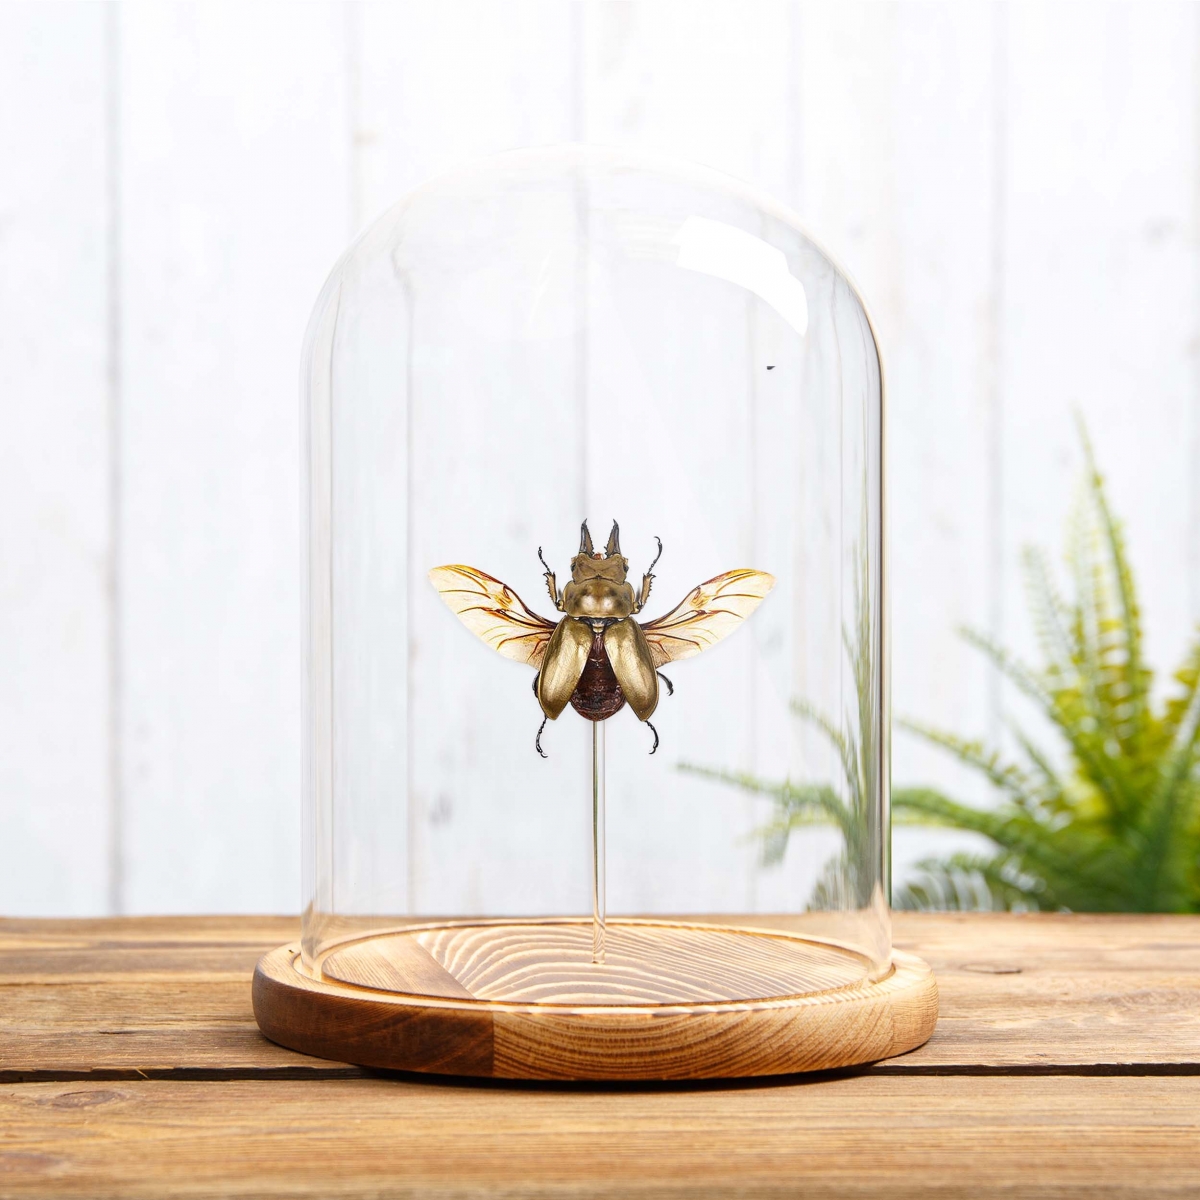 Allotopus Beetle in Glass Dome with Wooden Base (Allotopus rosenbergi)